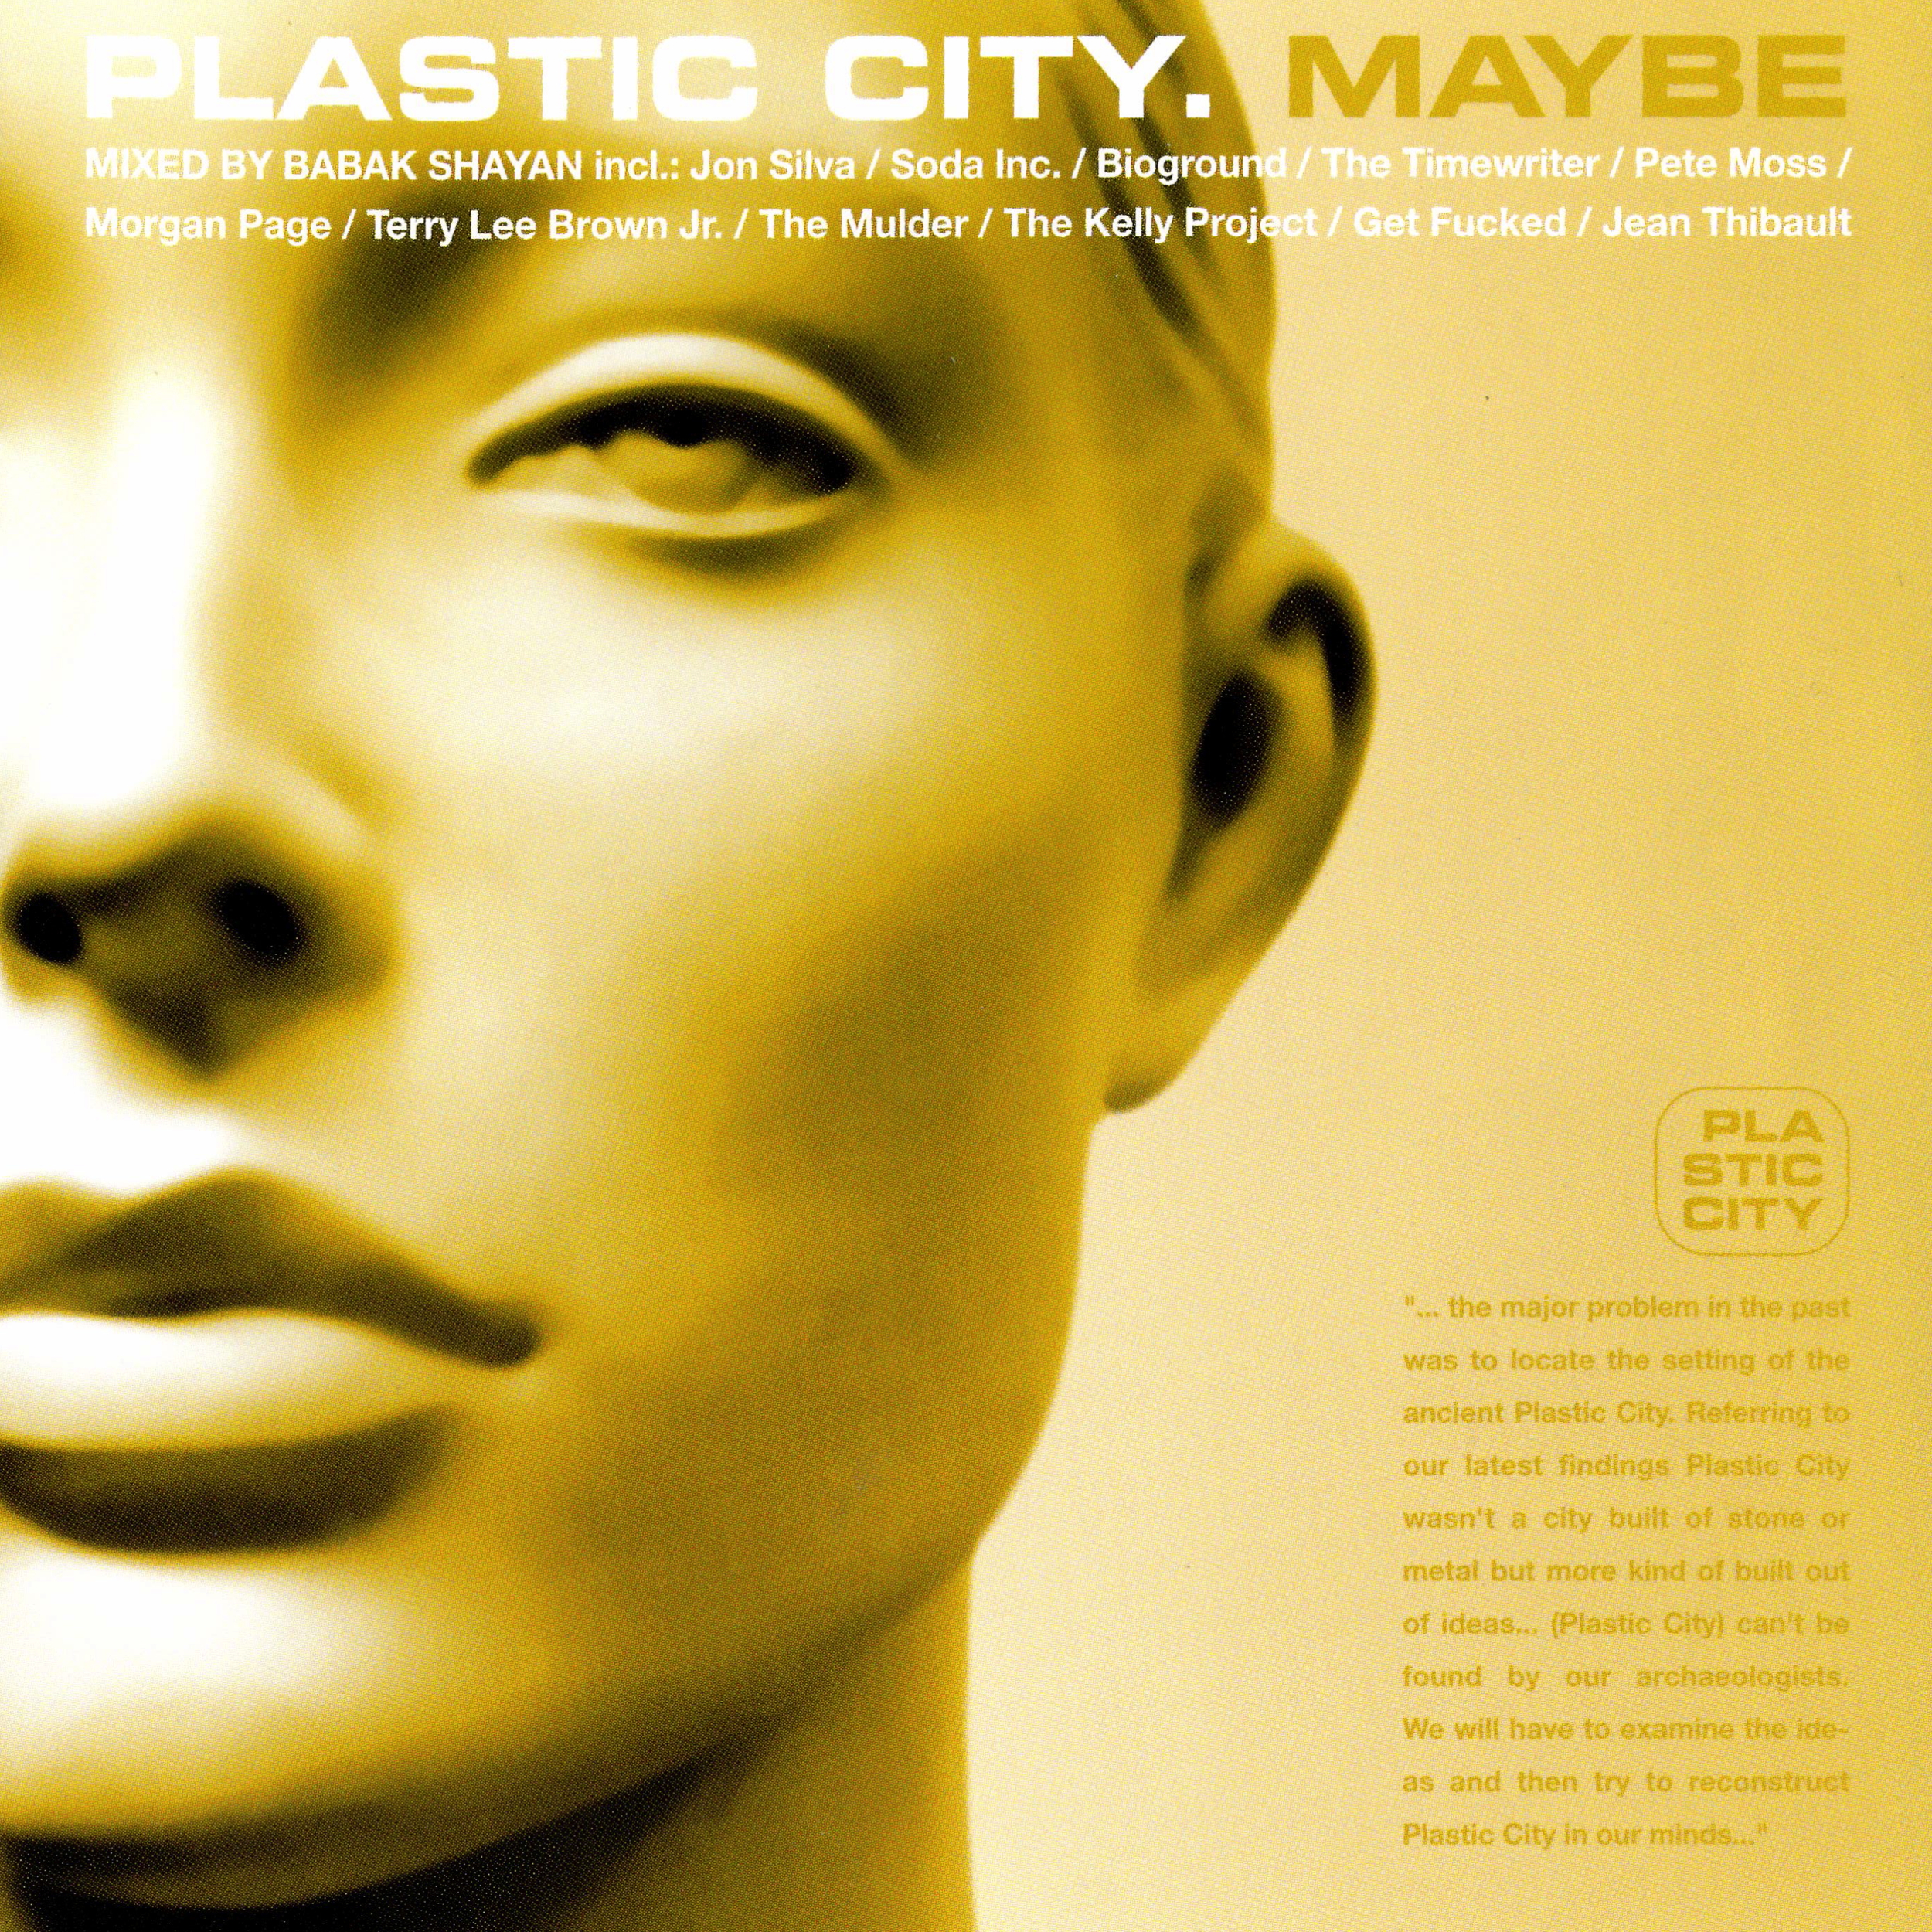 Plastic City. Maybe (Continuous DJ Mix by Babak Shayan)